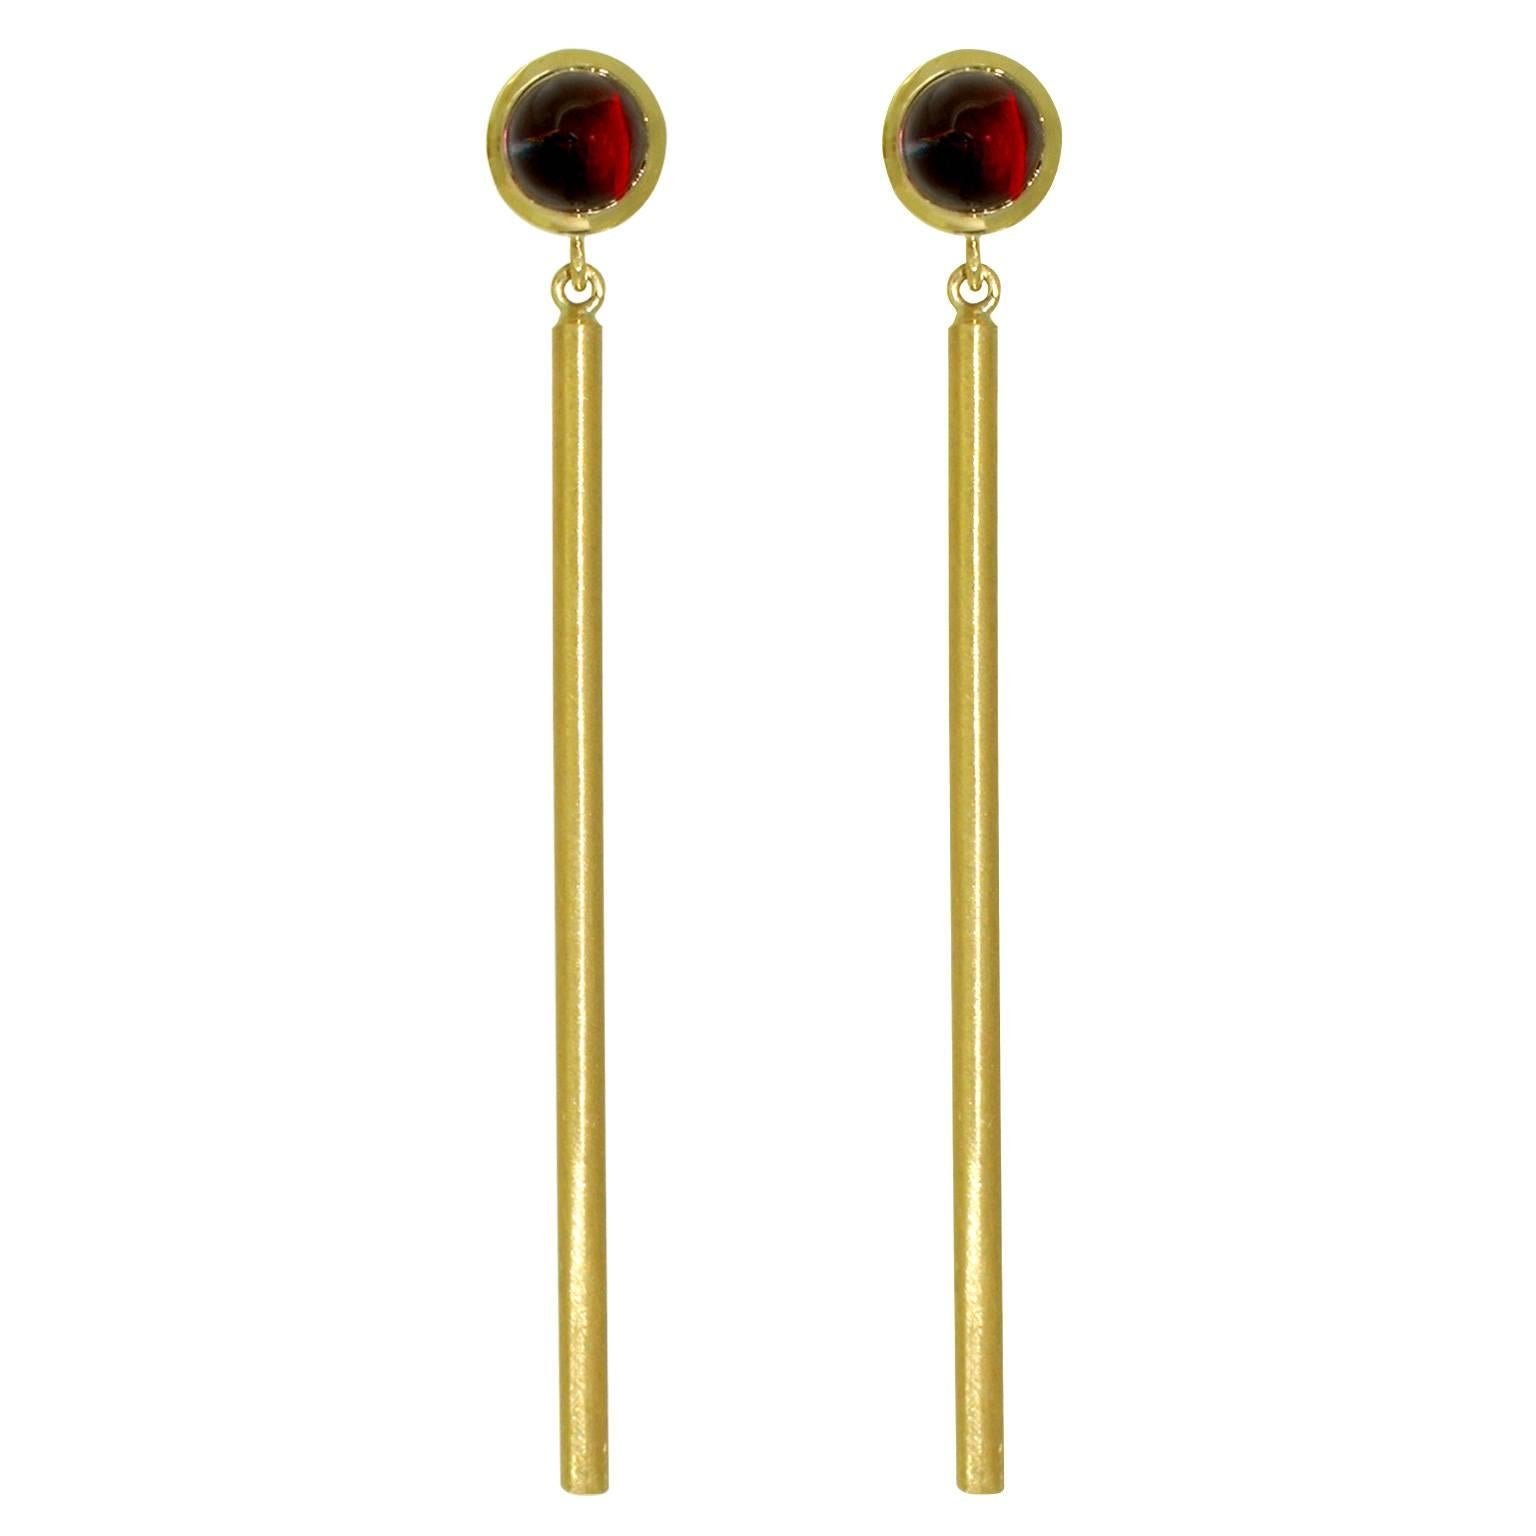 Warm glow of brushed 22 karat yellow gold makes these simple and elegant earrings a timeless classic. Inspired by Egyptian Art Deco revival architecture, and set with bullet cabochon rhodolite garnets, these earrings are sexy and sophisticated.